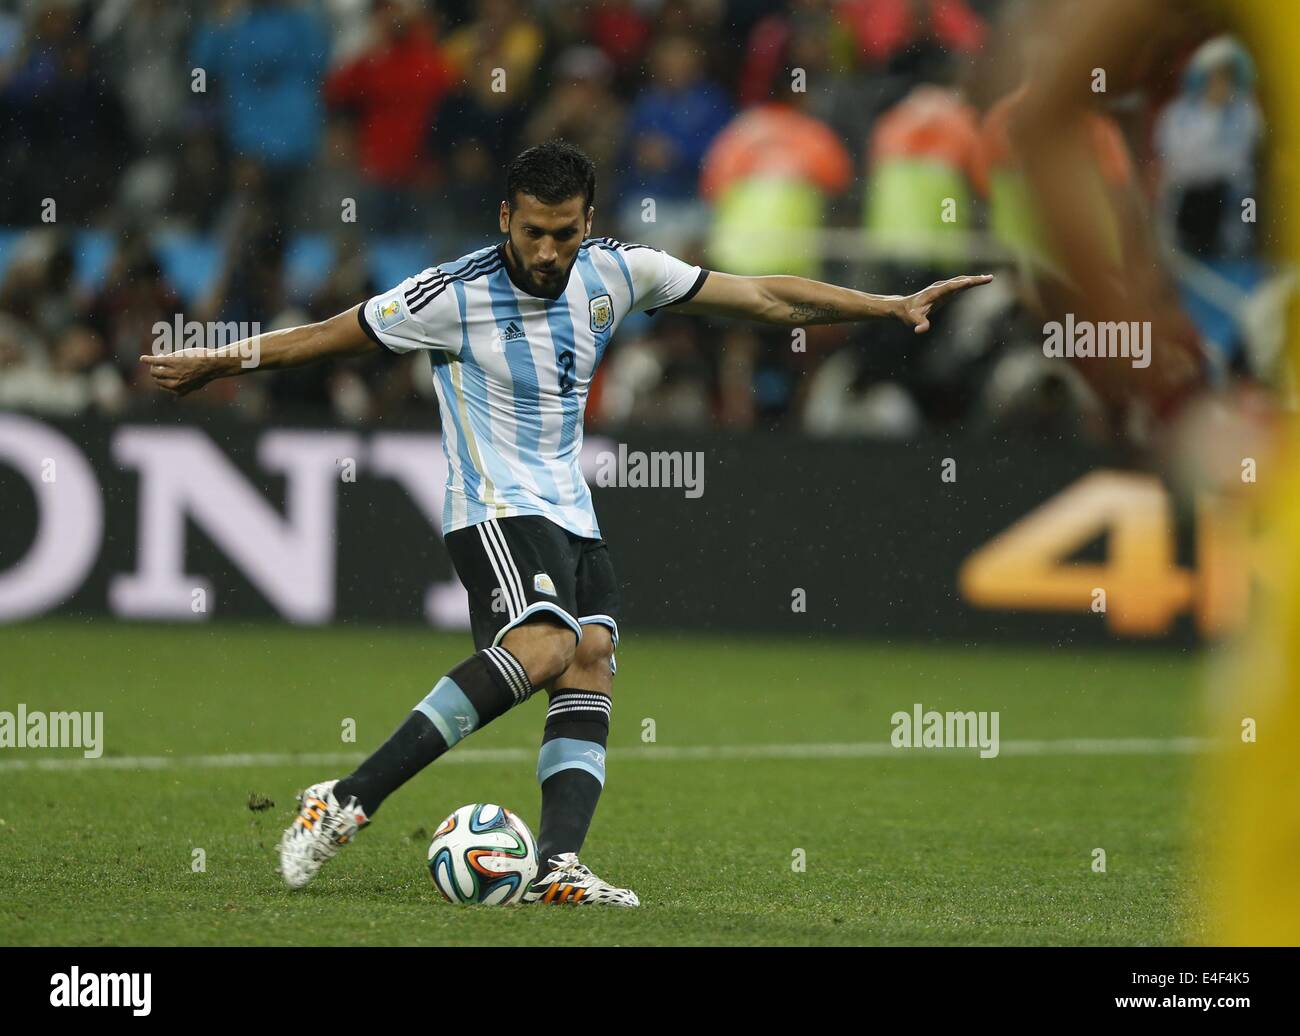 Sao Paulo, Brazil. 9th July, 2014. Argentina's Ezequiel Garay shoots a penalty goal in the penalty shoot-out during a semifinal match between Netherlands and Argentina of 2014 FIFA World Cup at the Arena de Sao Paulo Stadium in Sao Paulo, Brazil, on July 9, 2014. Argentina won 4-2 on penalties over Netherlands after a 0-0 tie and qualified for the final on Wednesday. Credit:  Wang Lili/Xinhua/Alamy Live News Stock Photo